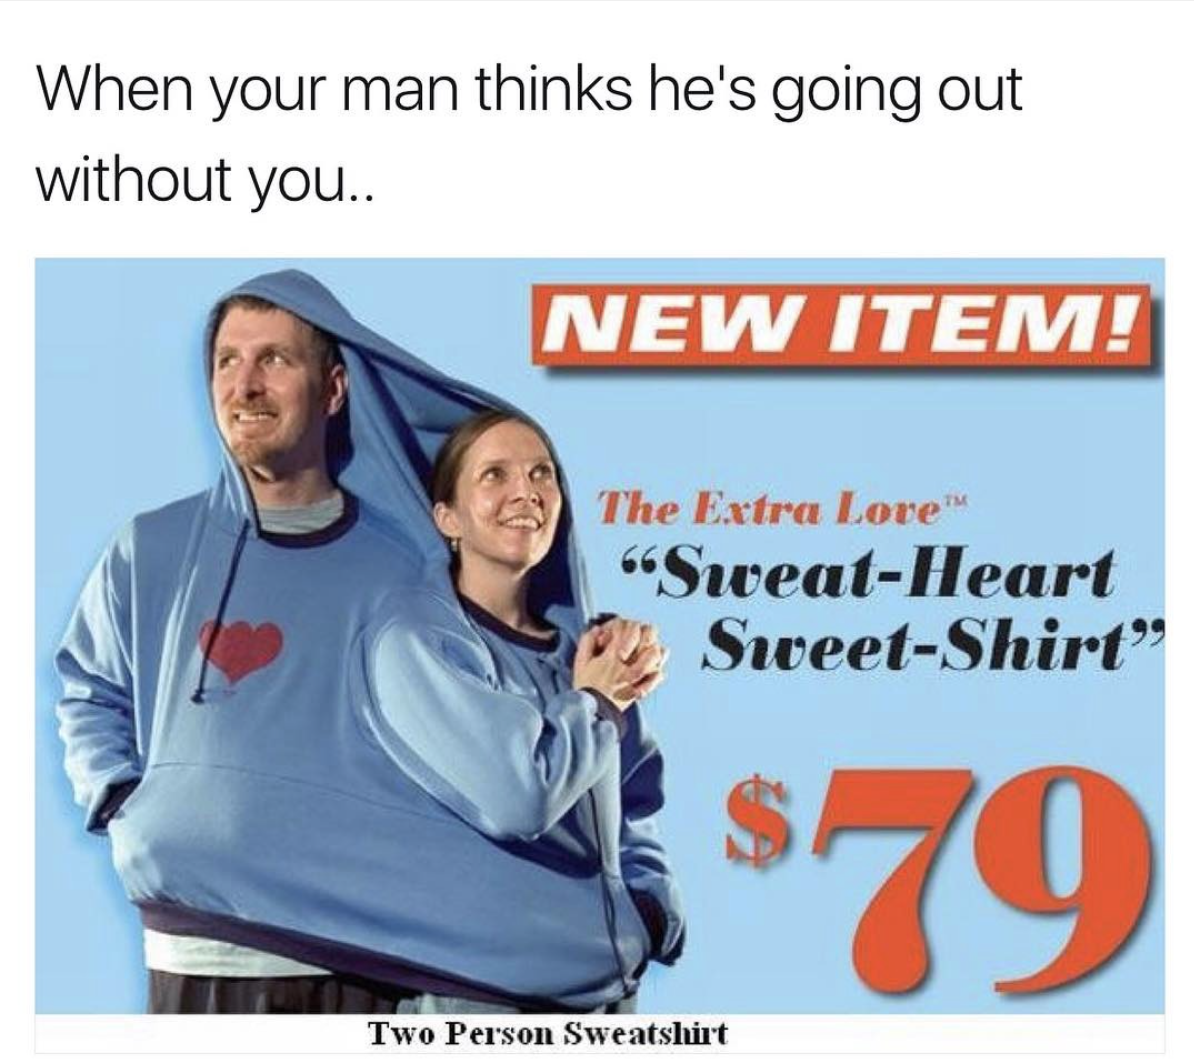 memes - t shirt - When your man thinks he's going out without you.. New Item! The Extra Lore SweatHeart SweetShirt $79 Two Person Sweatshirt